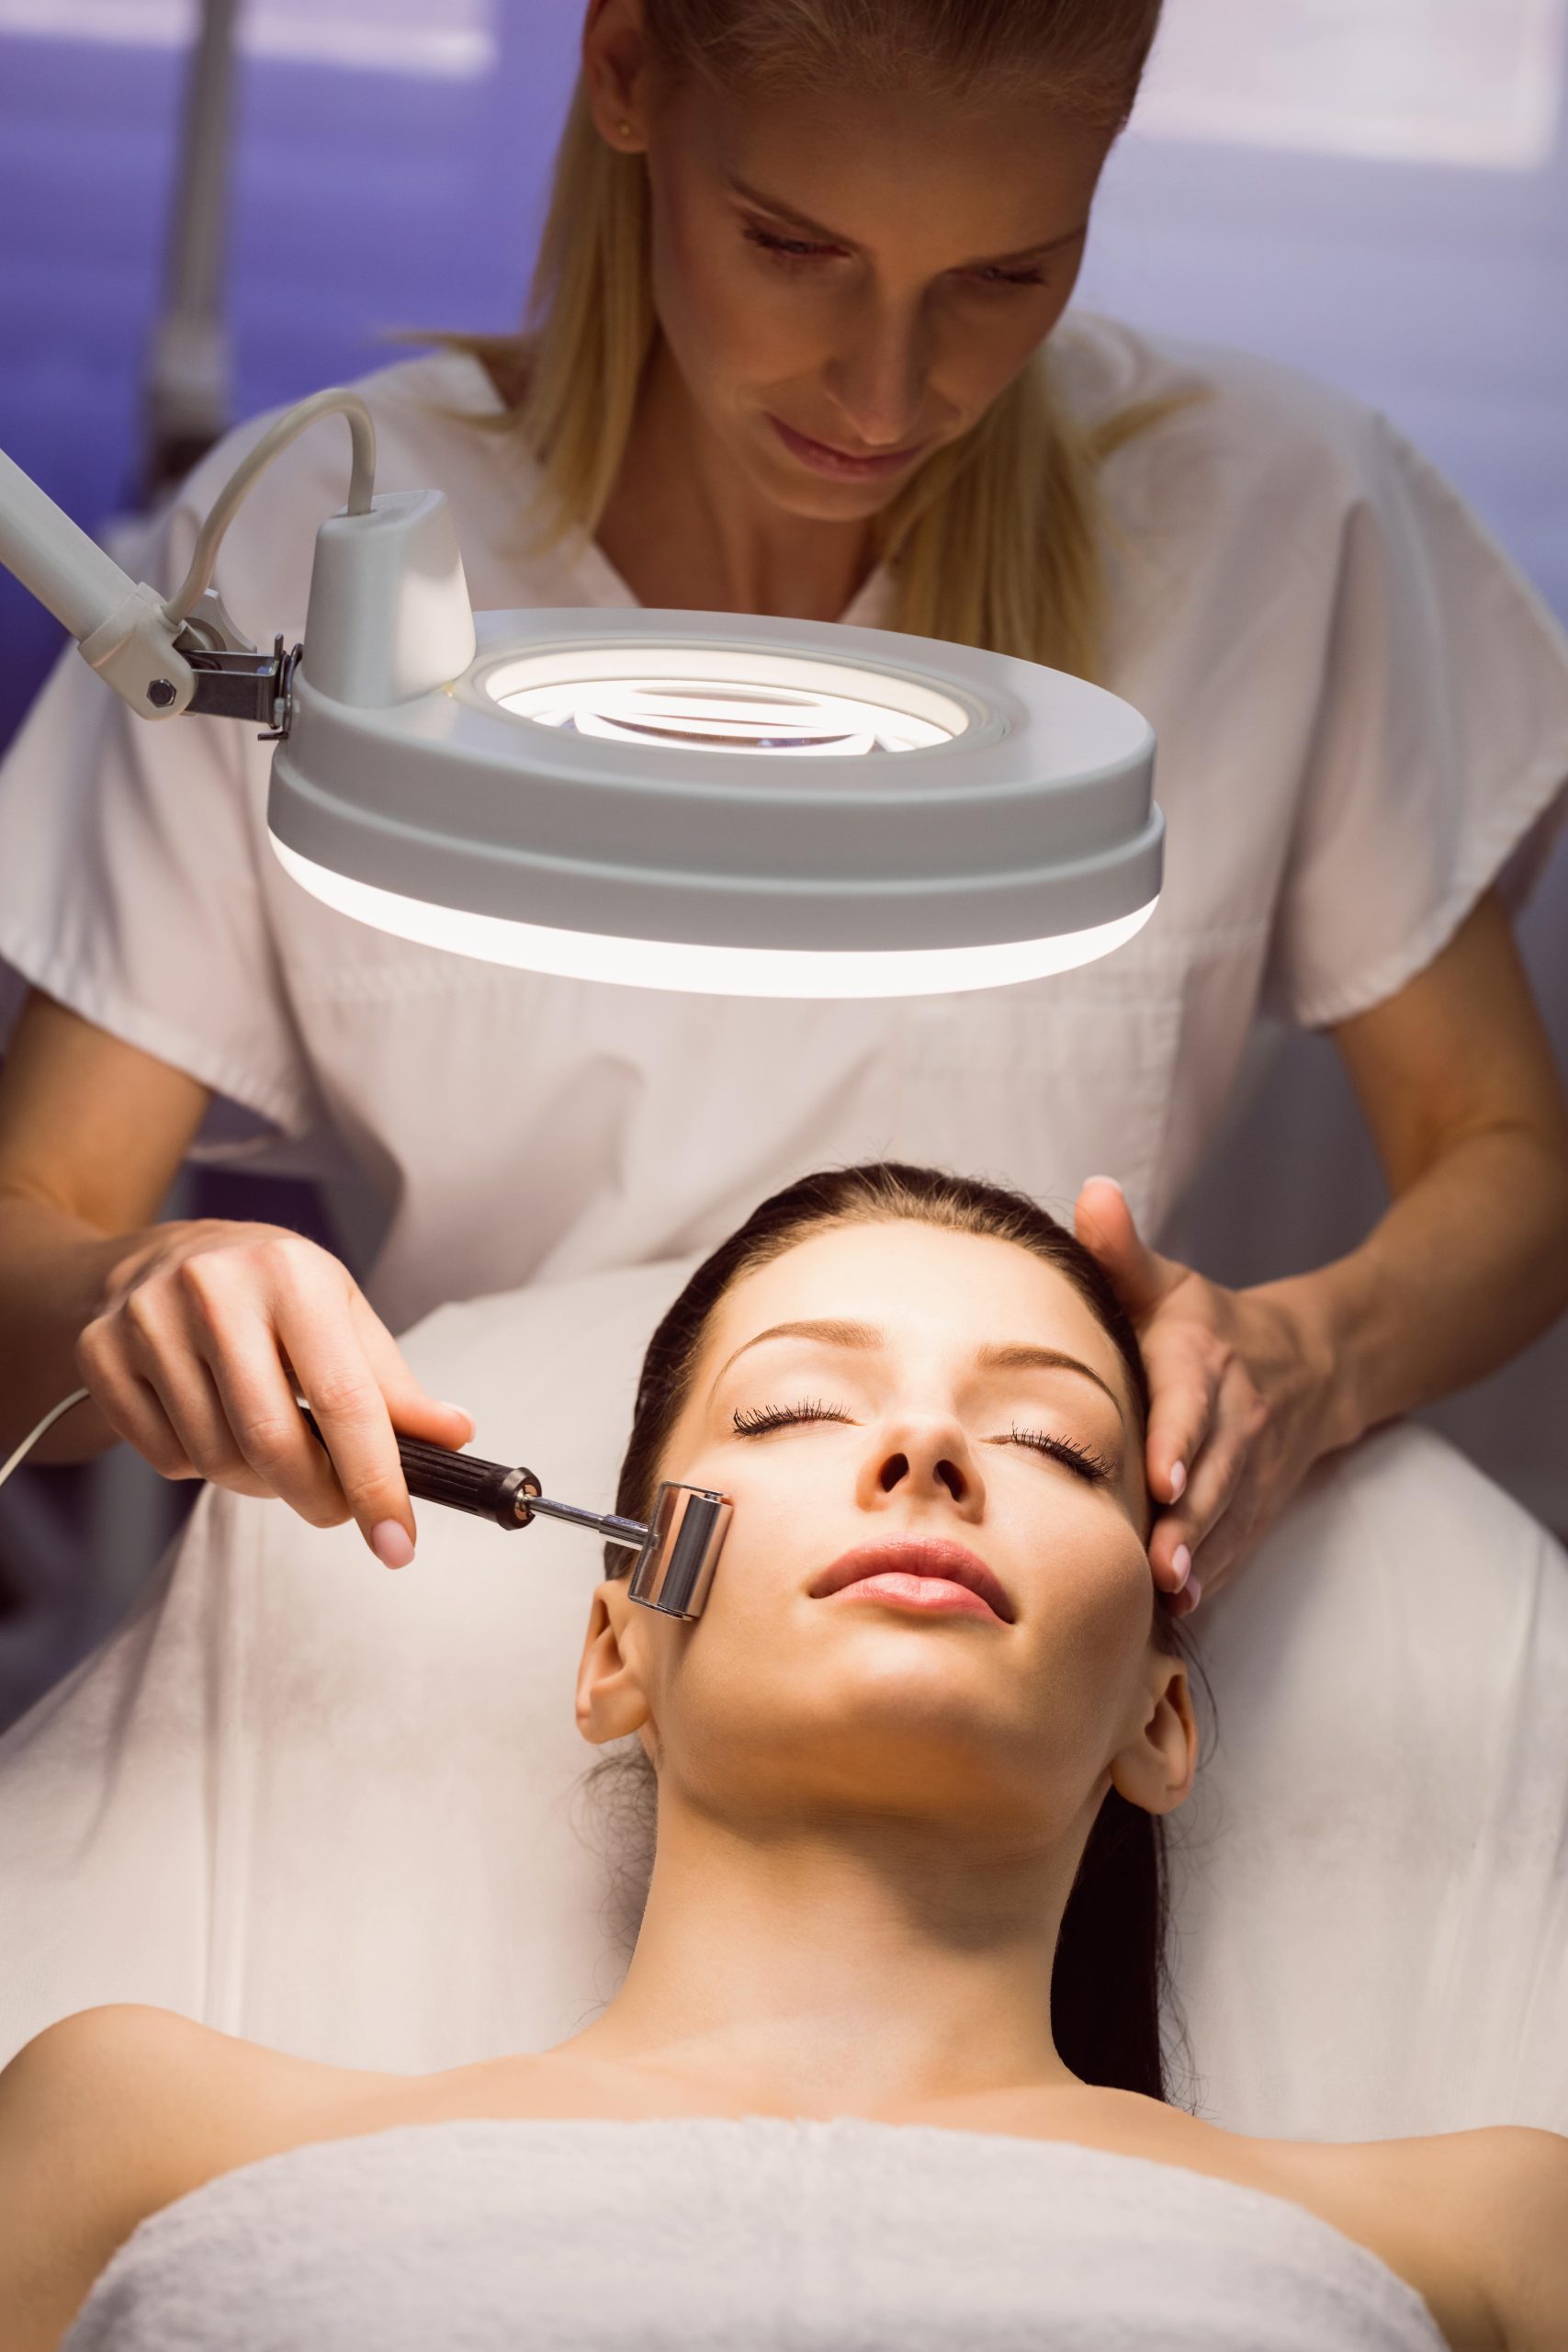 Light Hair Removal courses